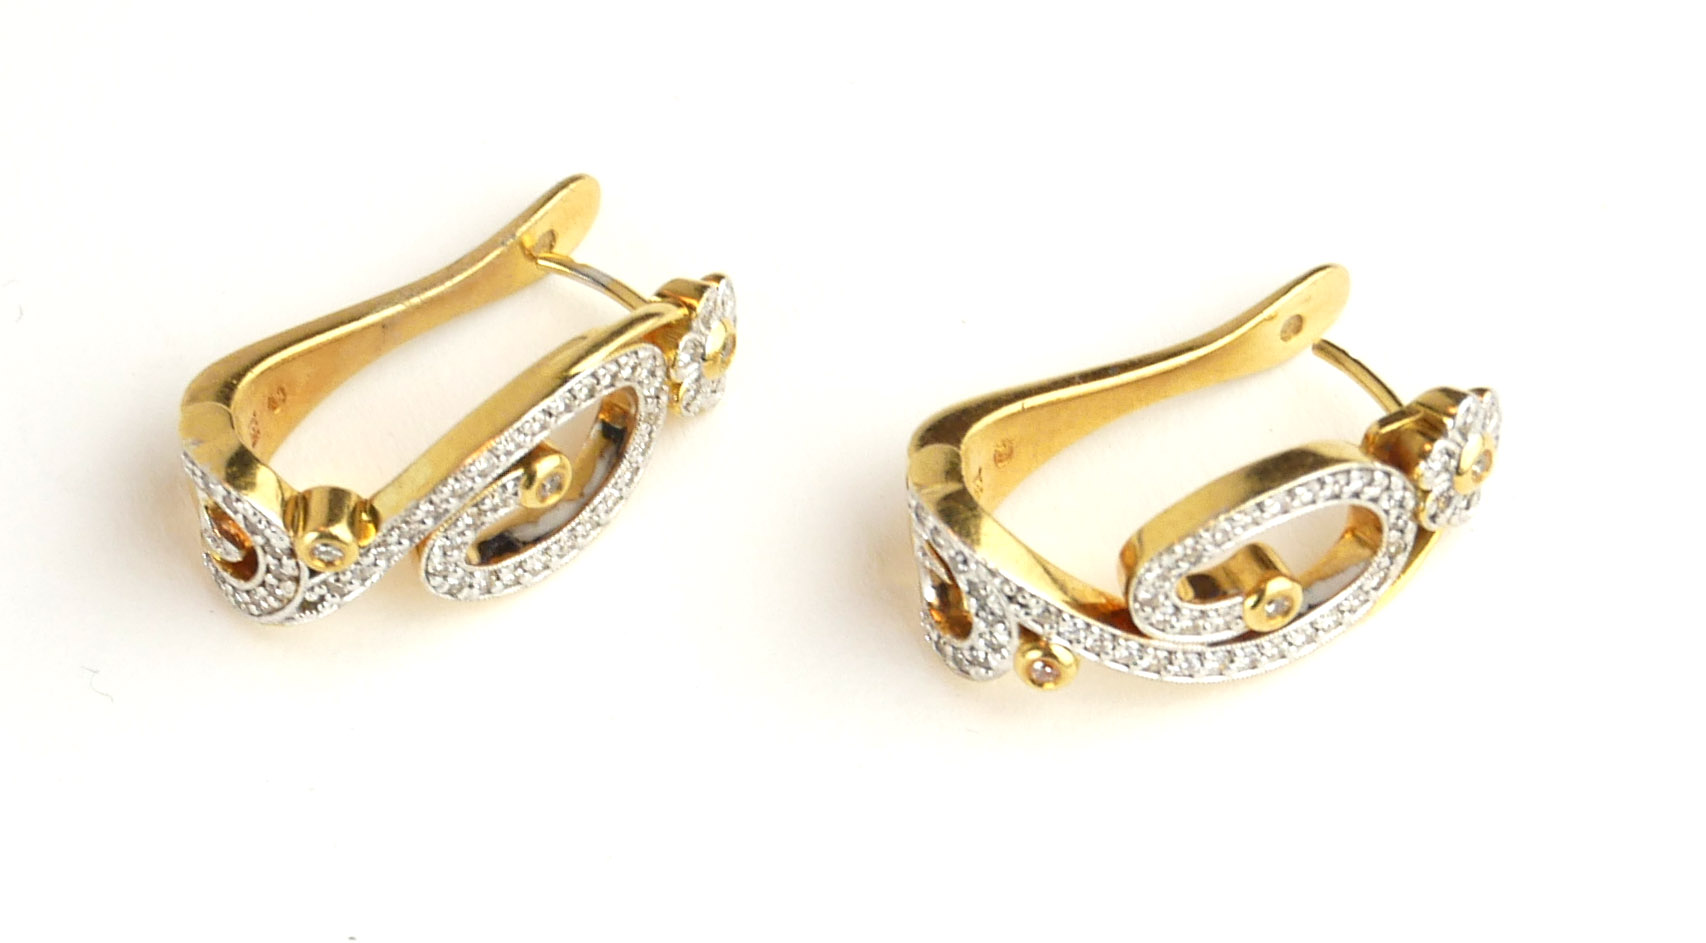 A PAIR OF 18CT GOLD AND DIAMOND EARRINGS Having a pavé set diamond scrolled design within a round - Image 2 of 2